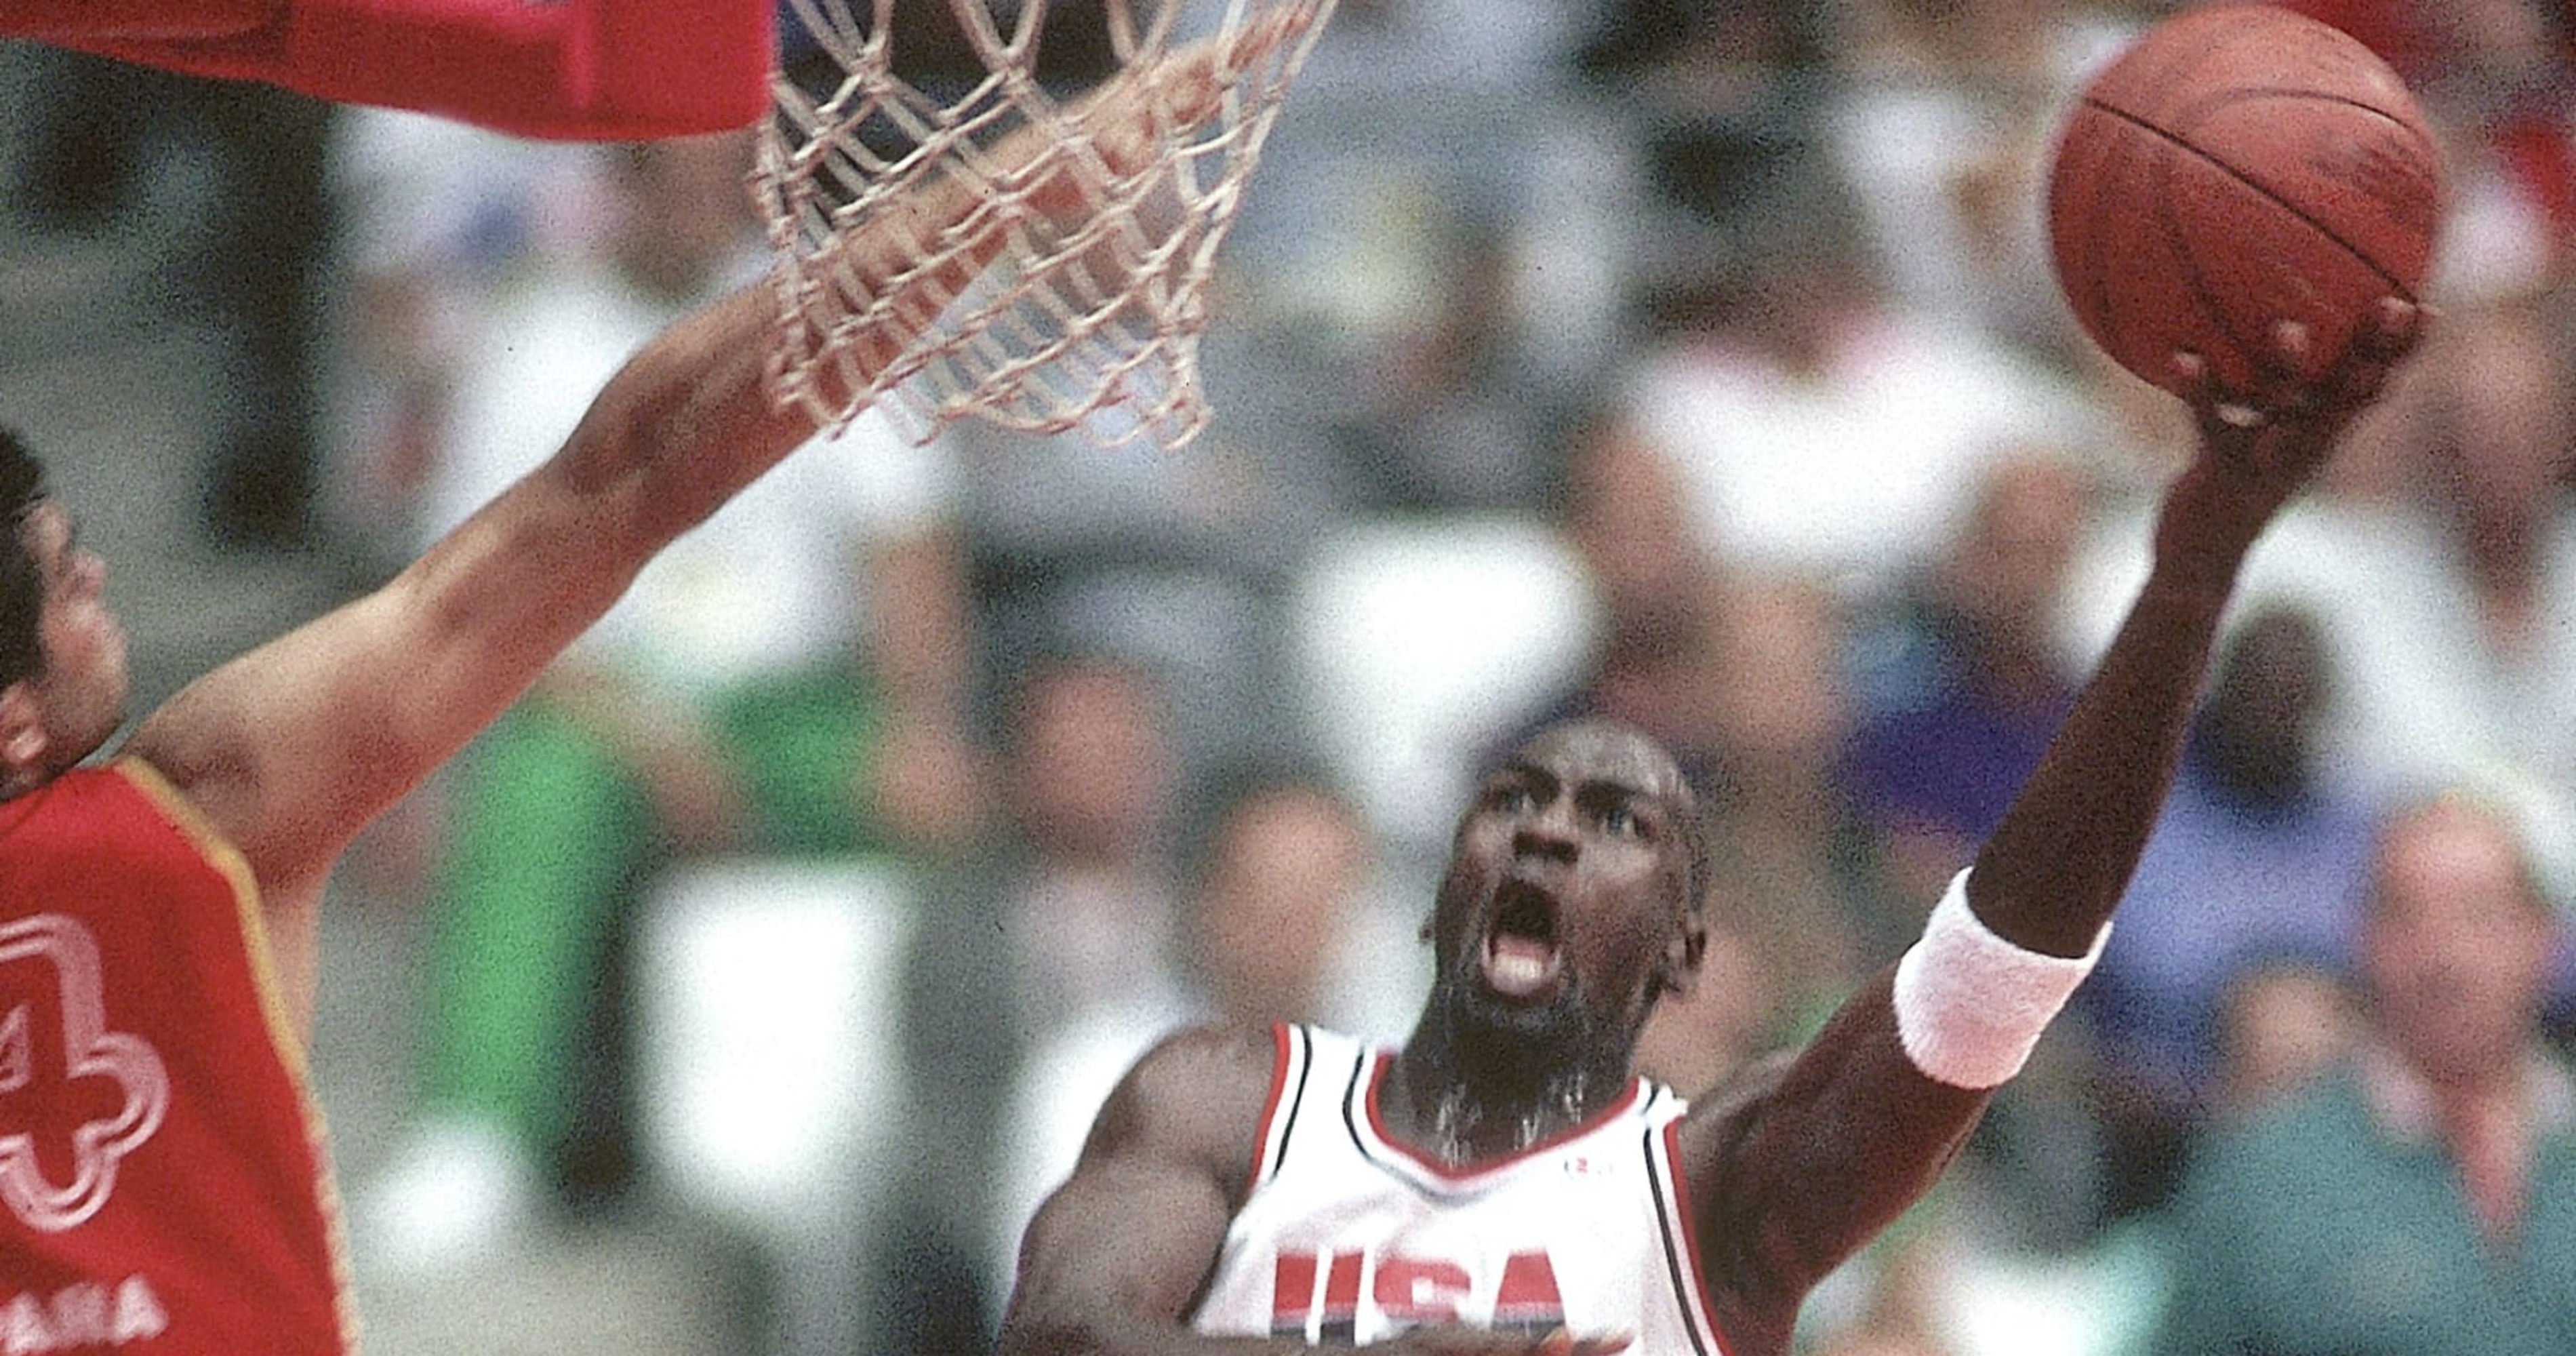 Michael Jordan's game-worn jersey just sold for MILLIONS